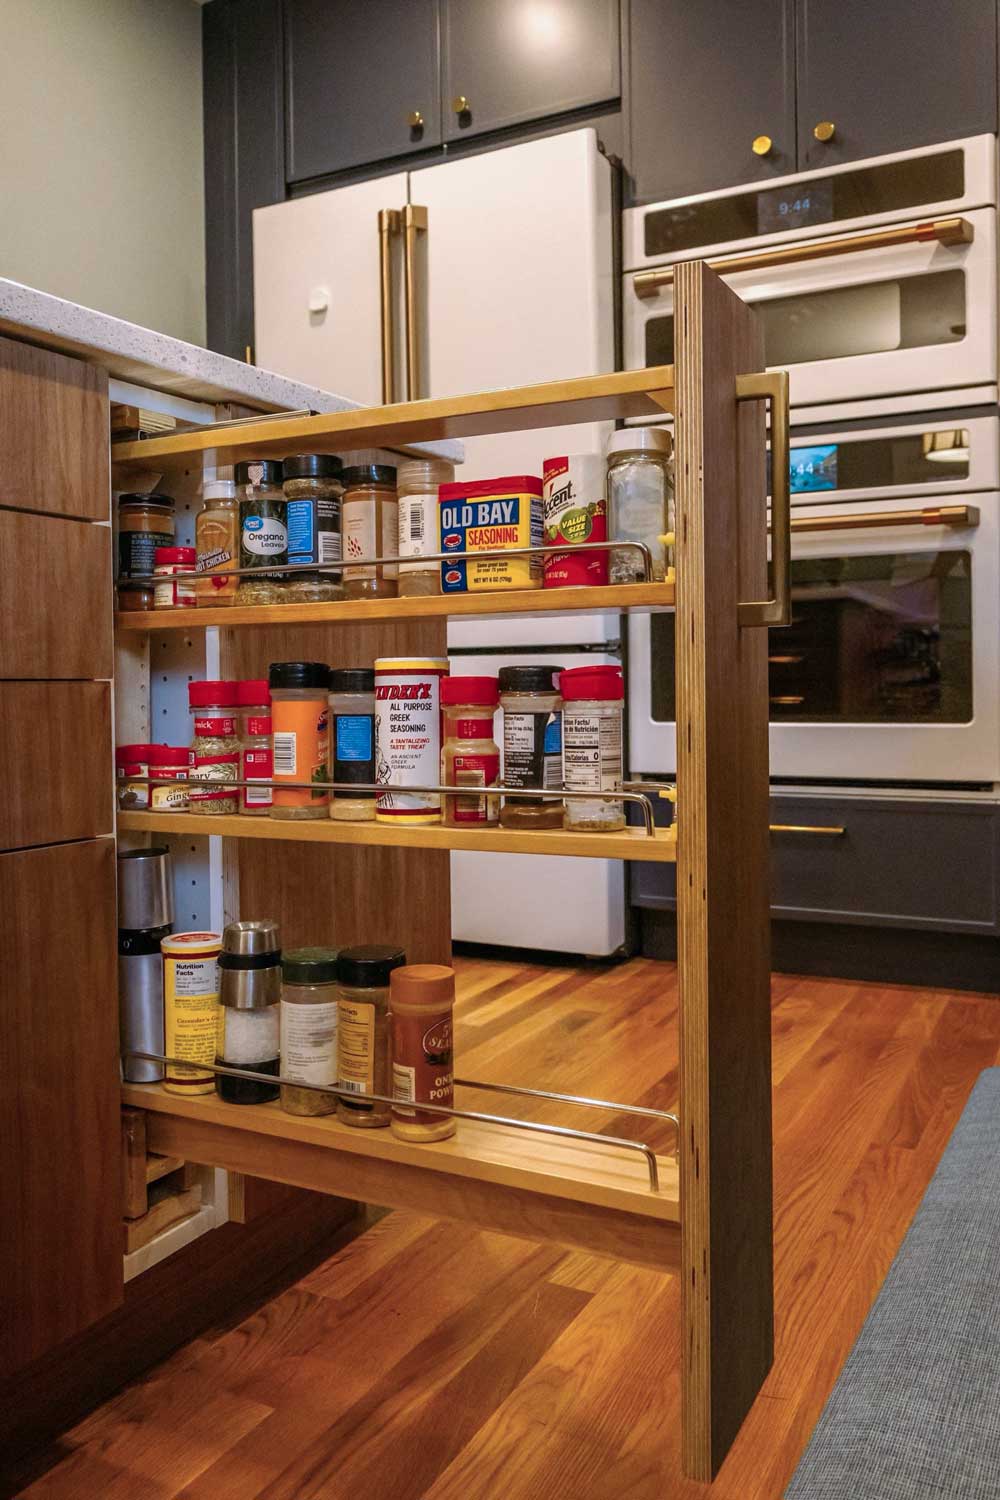 Pull-out spice storage in a kitchen island cabinet